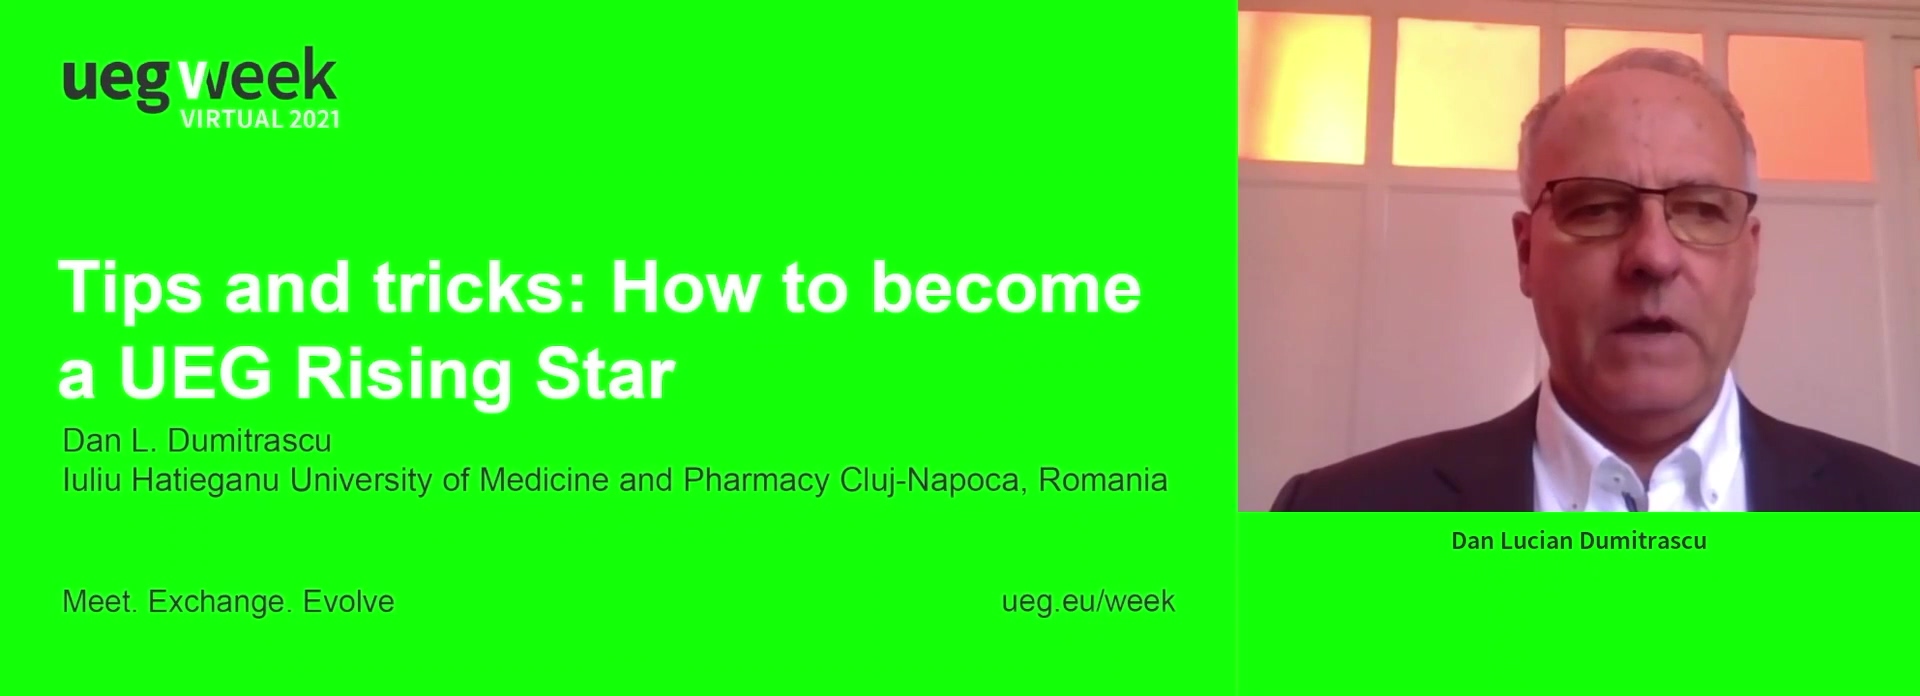 Tips and tricks: How to become a UEG Rising Star